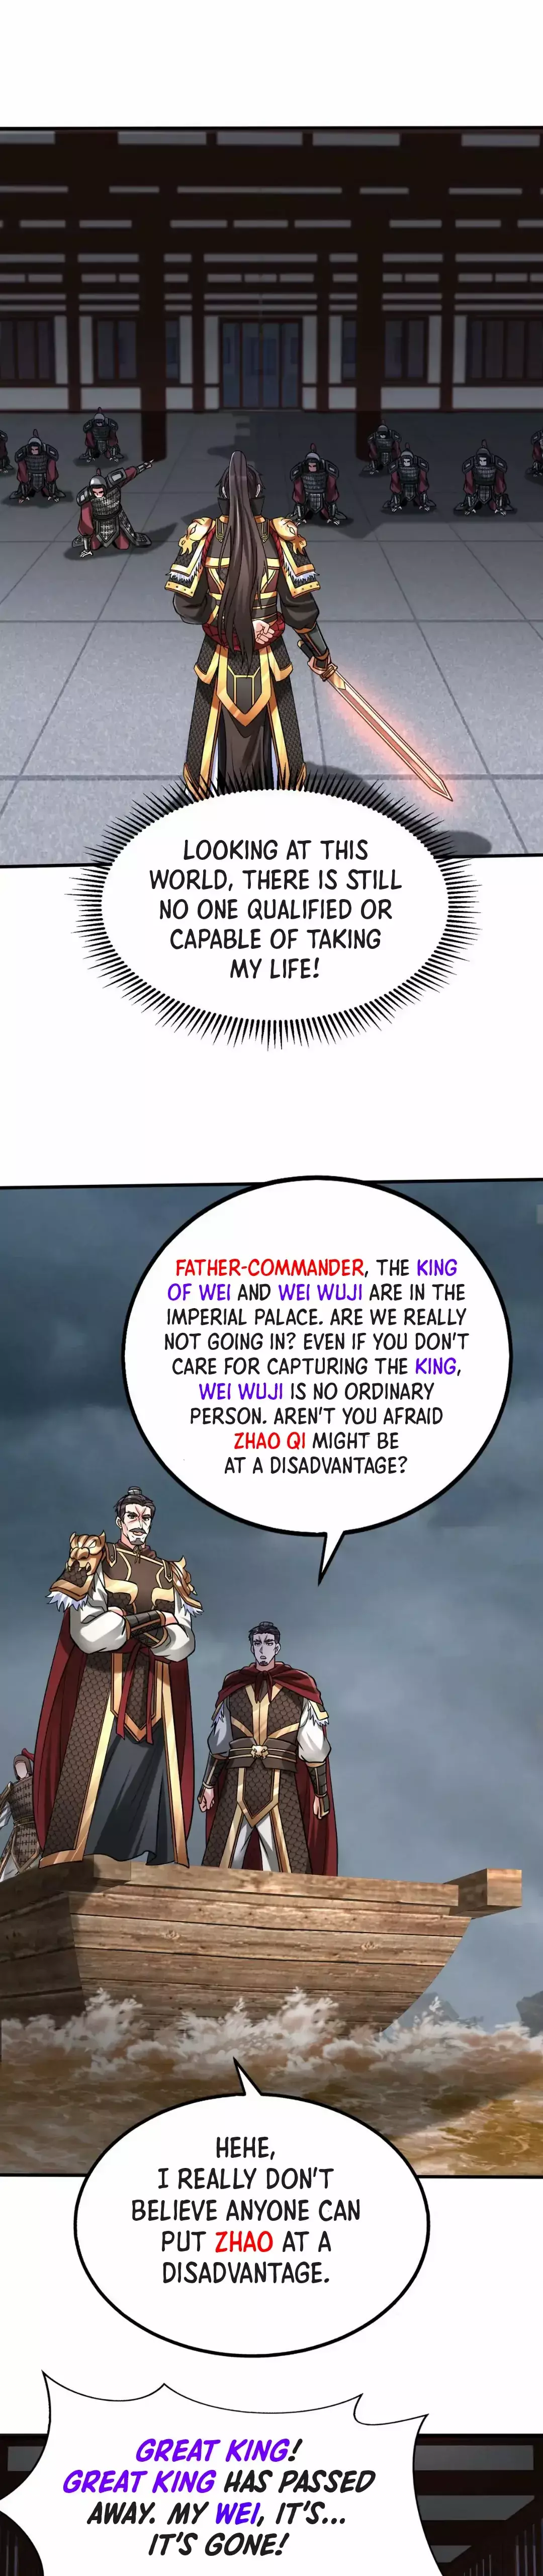 The Son Of The First Emperor Kills Enemies And Becomes A God - 62 page 16-2cf05bdd